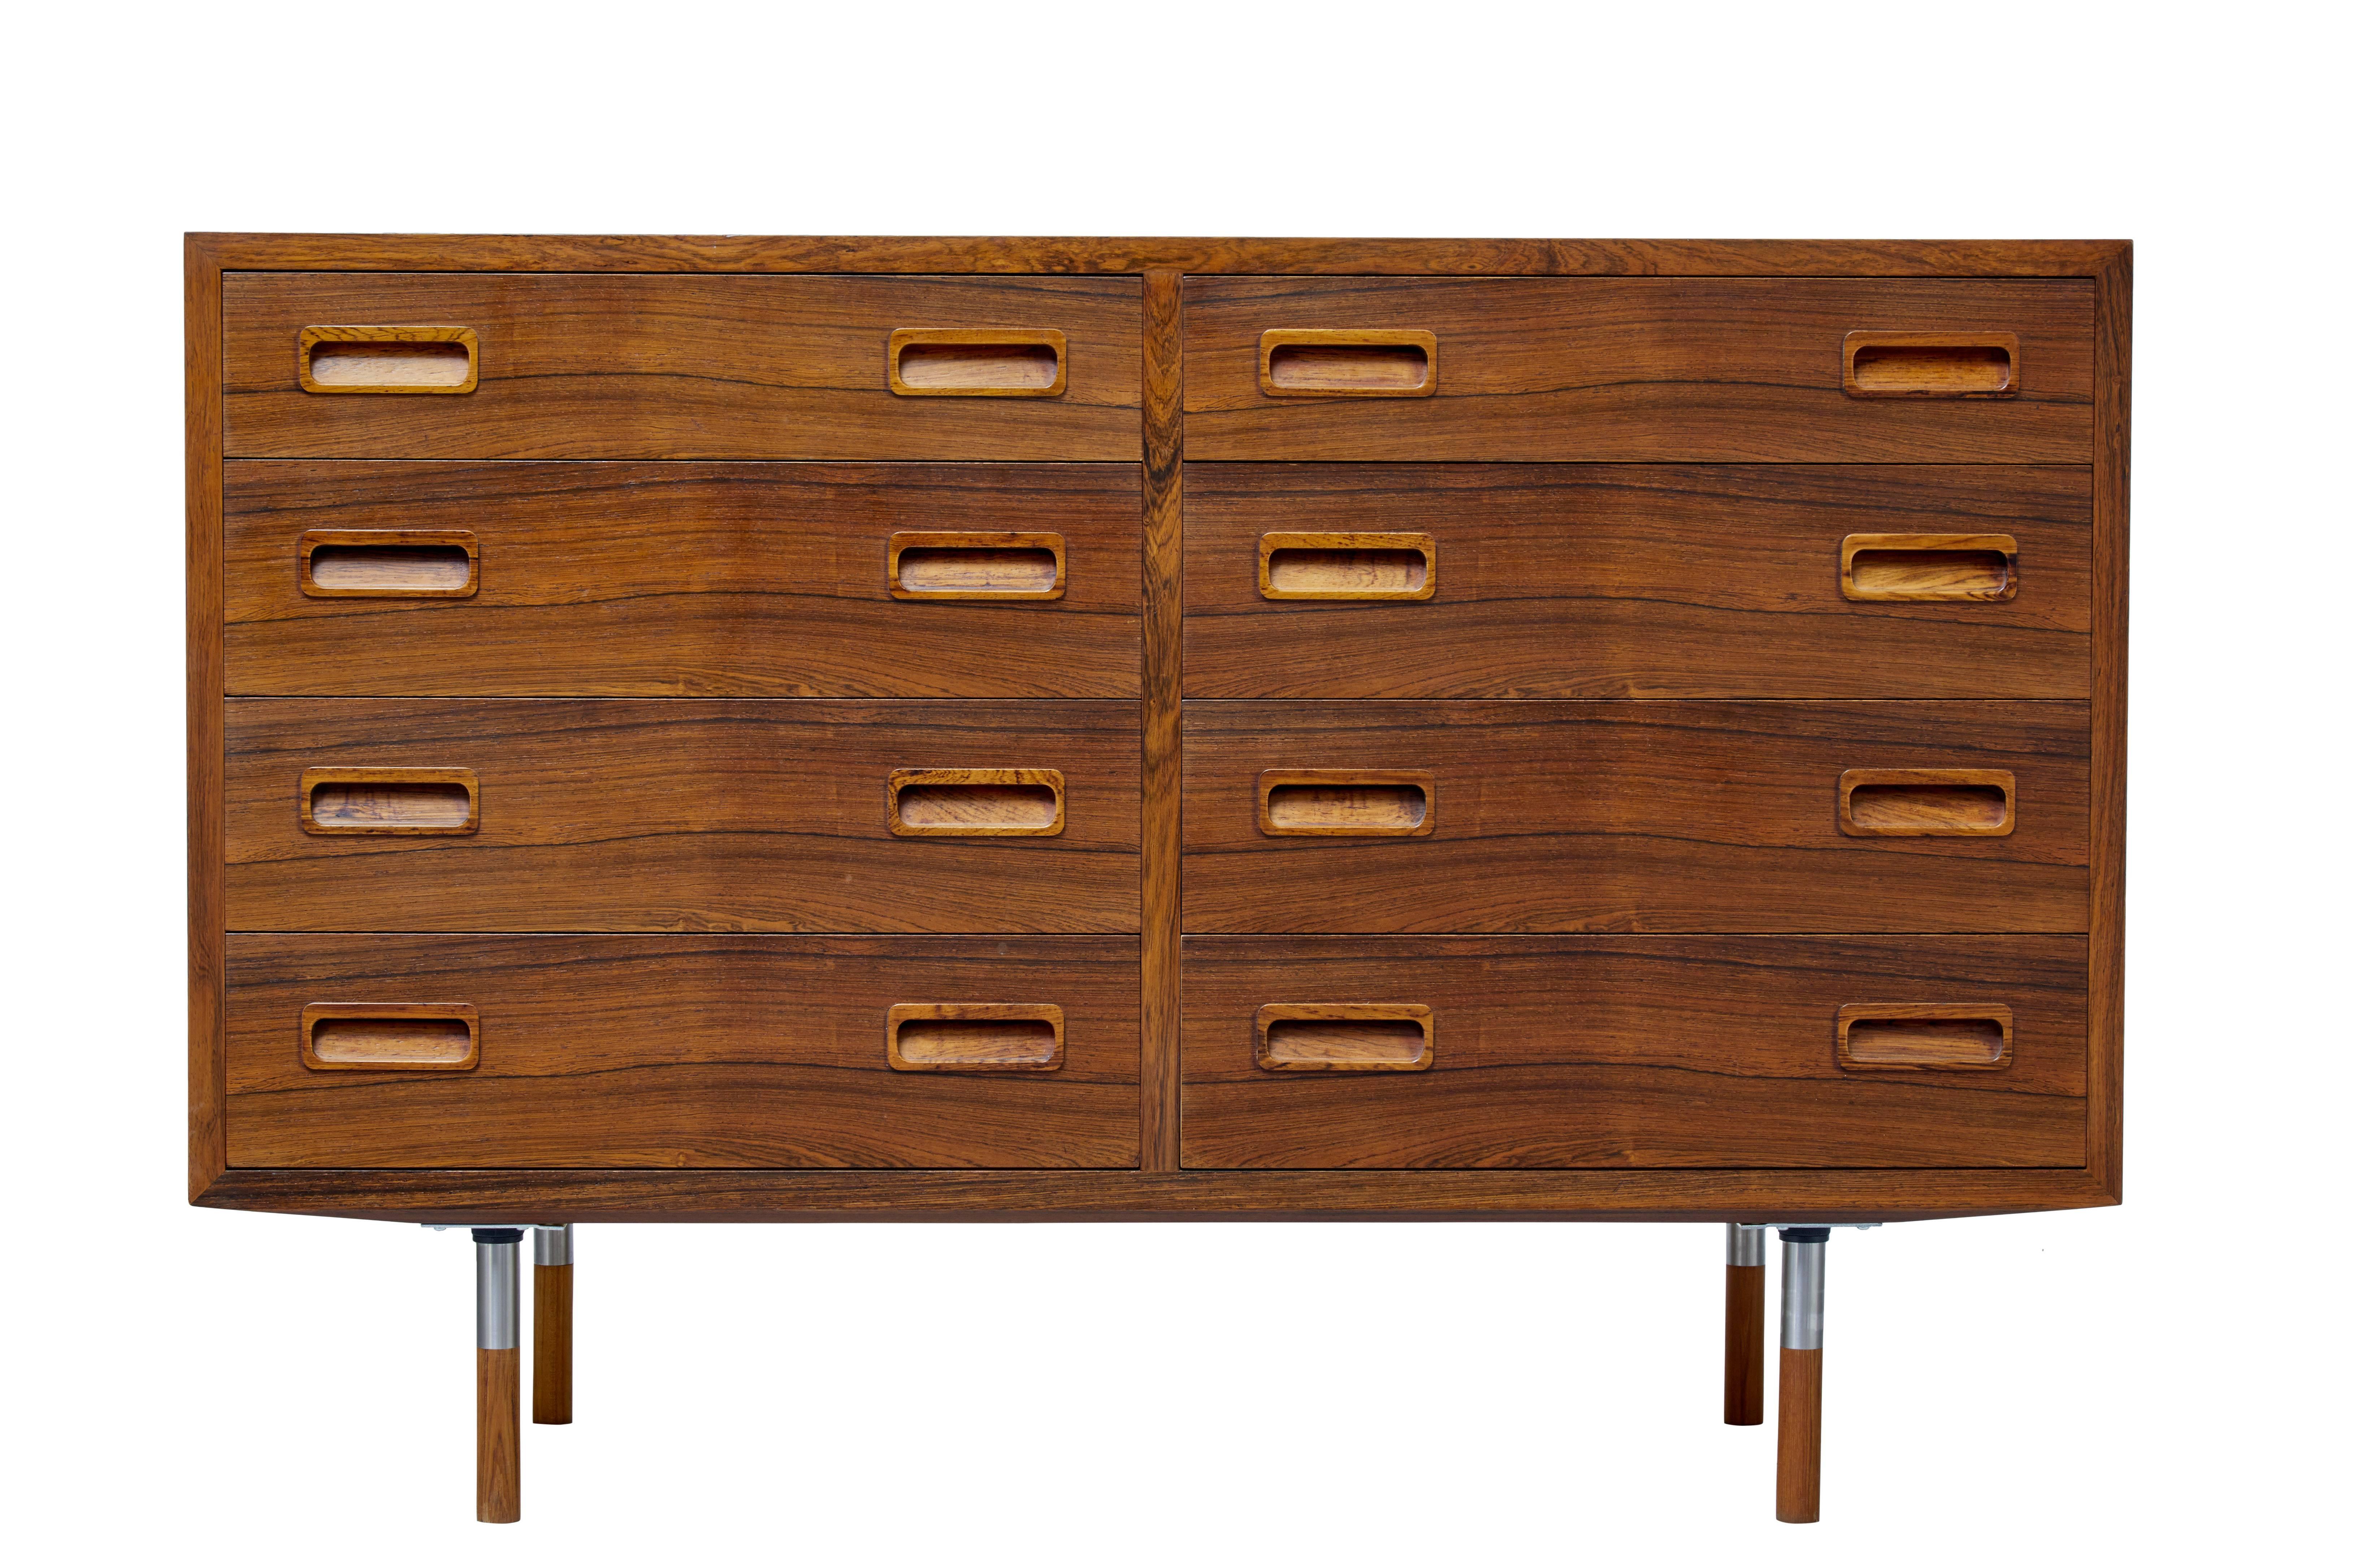 1960s Danish made rosewood chest of drawers.

Made from good quality rosewood veneers with inset rosewood handles.

Four graduating drawers on each side. Baize lined drawers which shows this was used as buffet.

Standing on chrome and wood